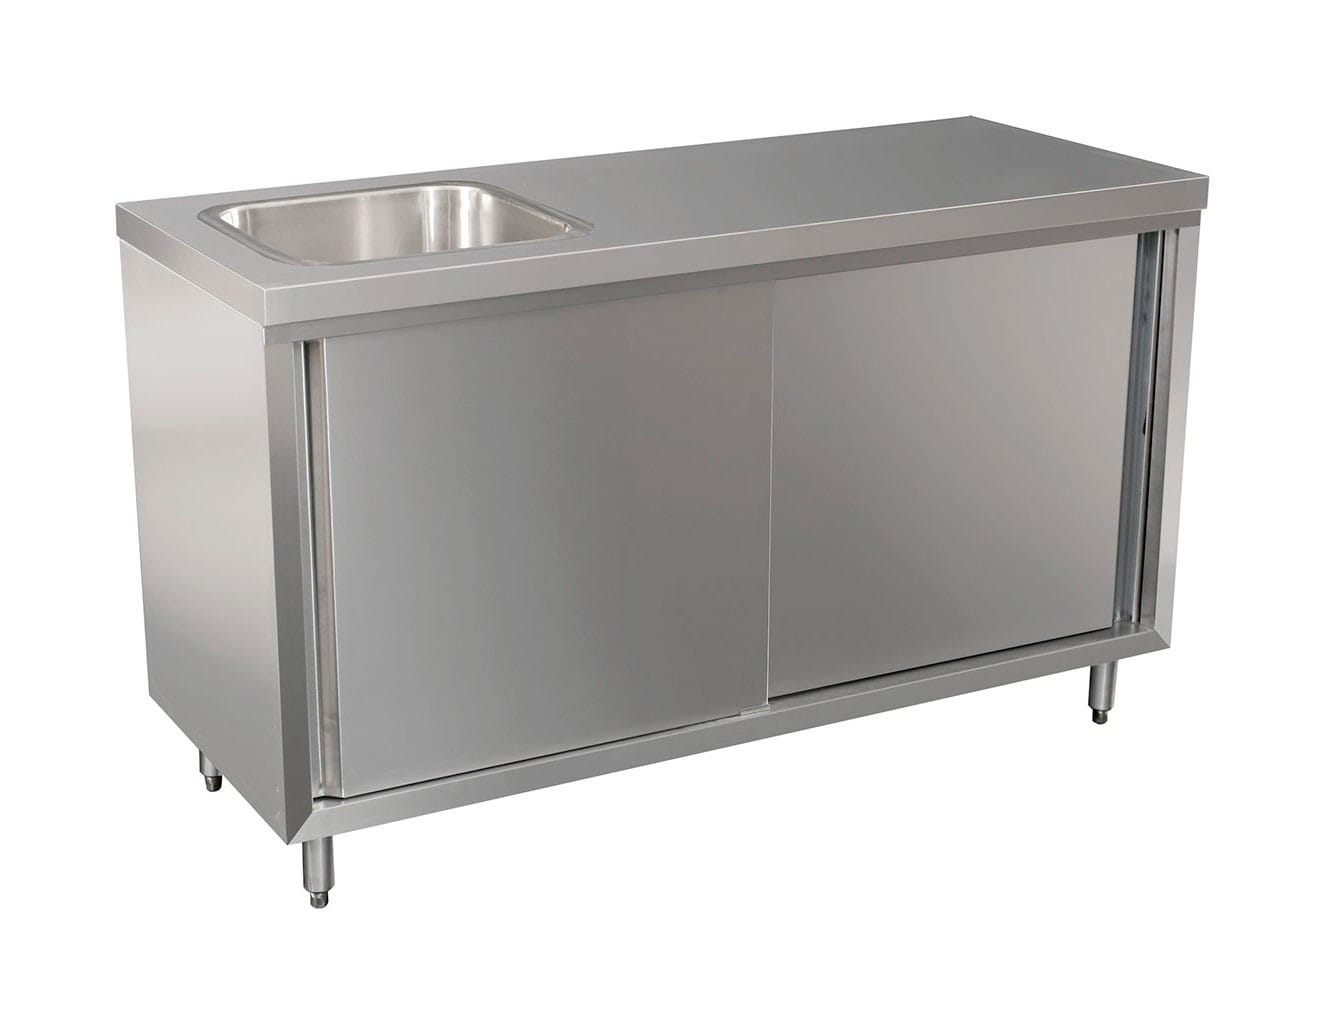 Stainless Cabinet with fully integrated sink on left. 1500 x 610 x 900mm high.